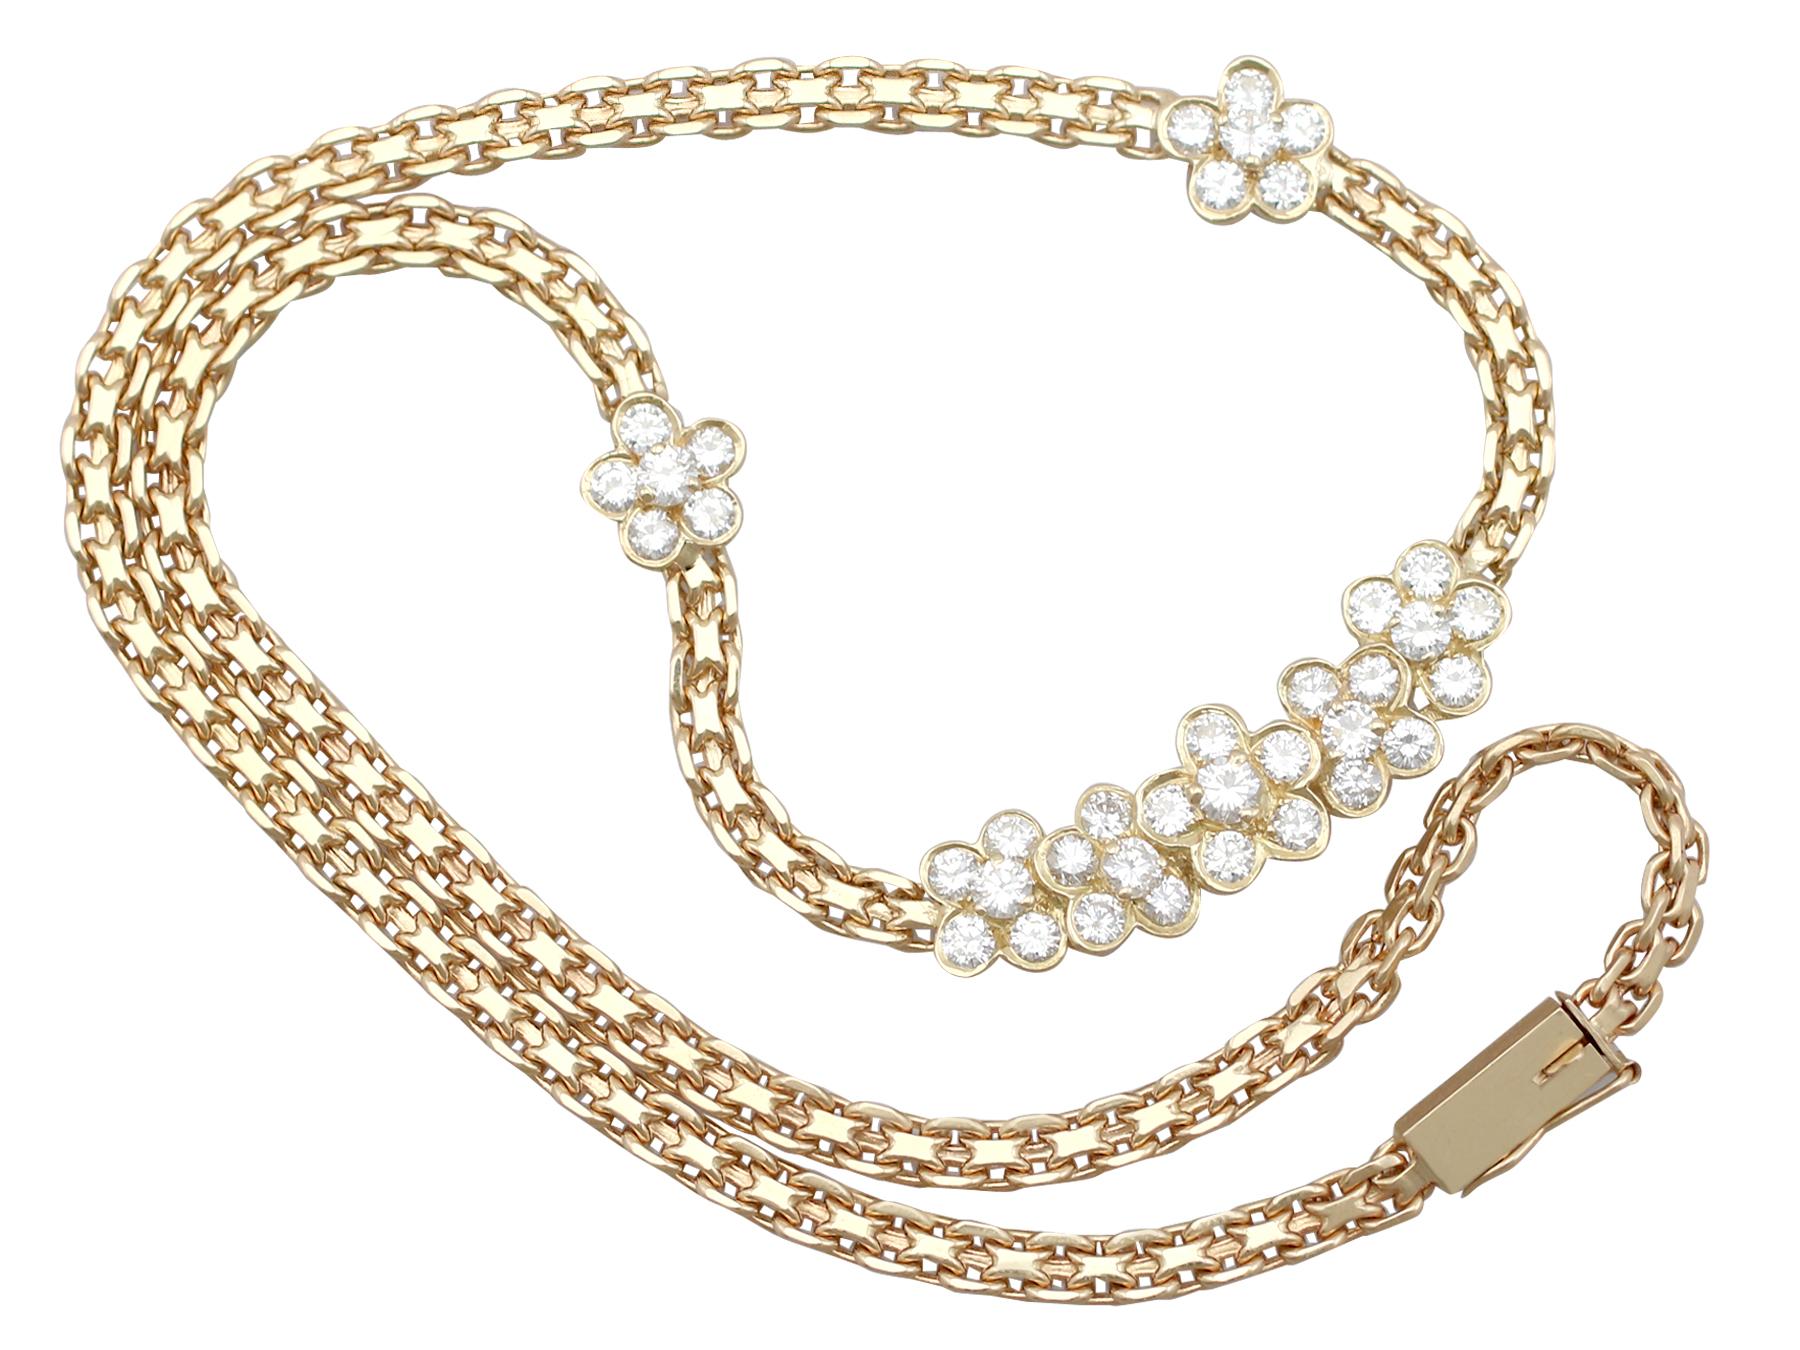 An impressive vintage 1980's French 4.51 carat diamond and 18 karat yellow gold necklace; part of our diverse vintage jewellery and estate jewelry collections.

This fine and impressive French diamond necklace has been crafted in 18k yellow